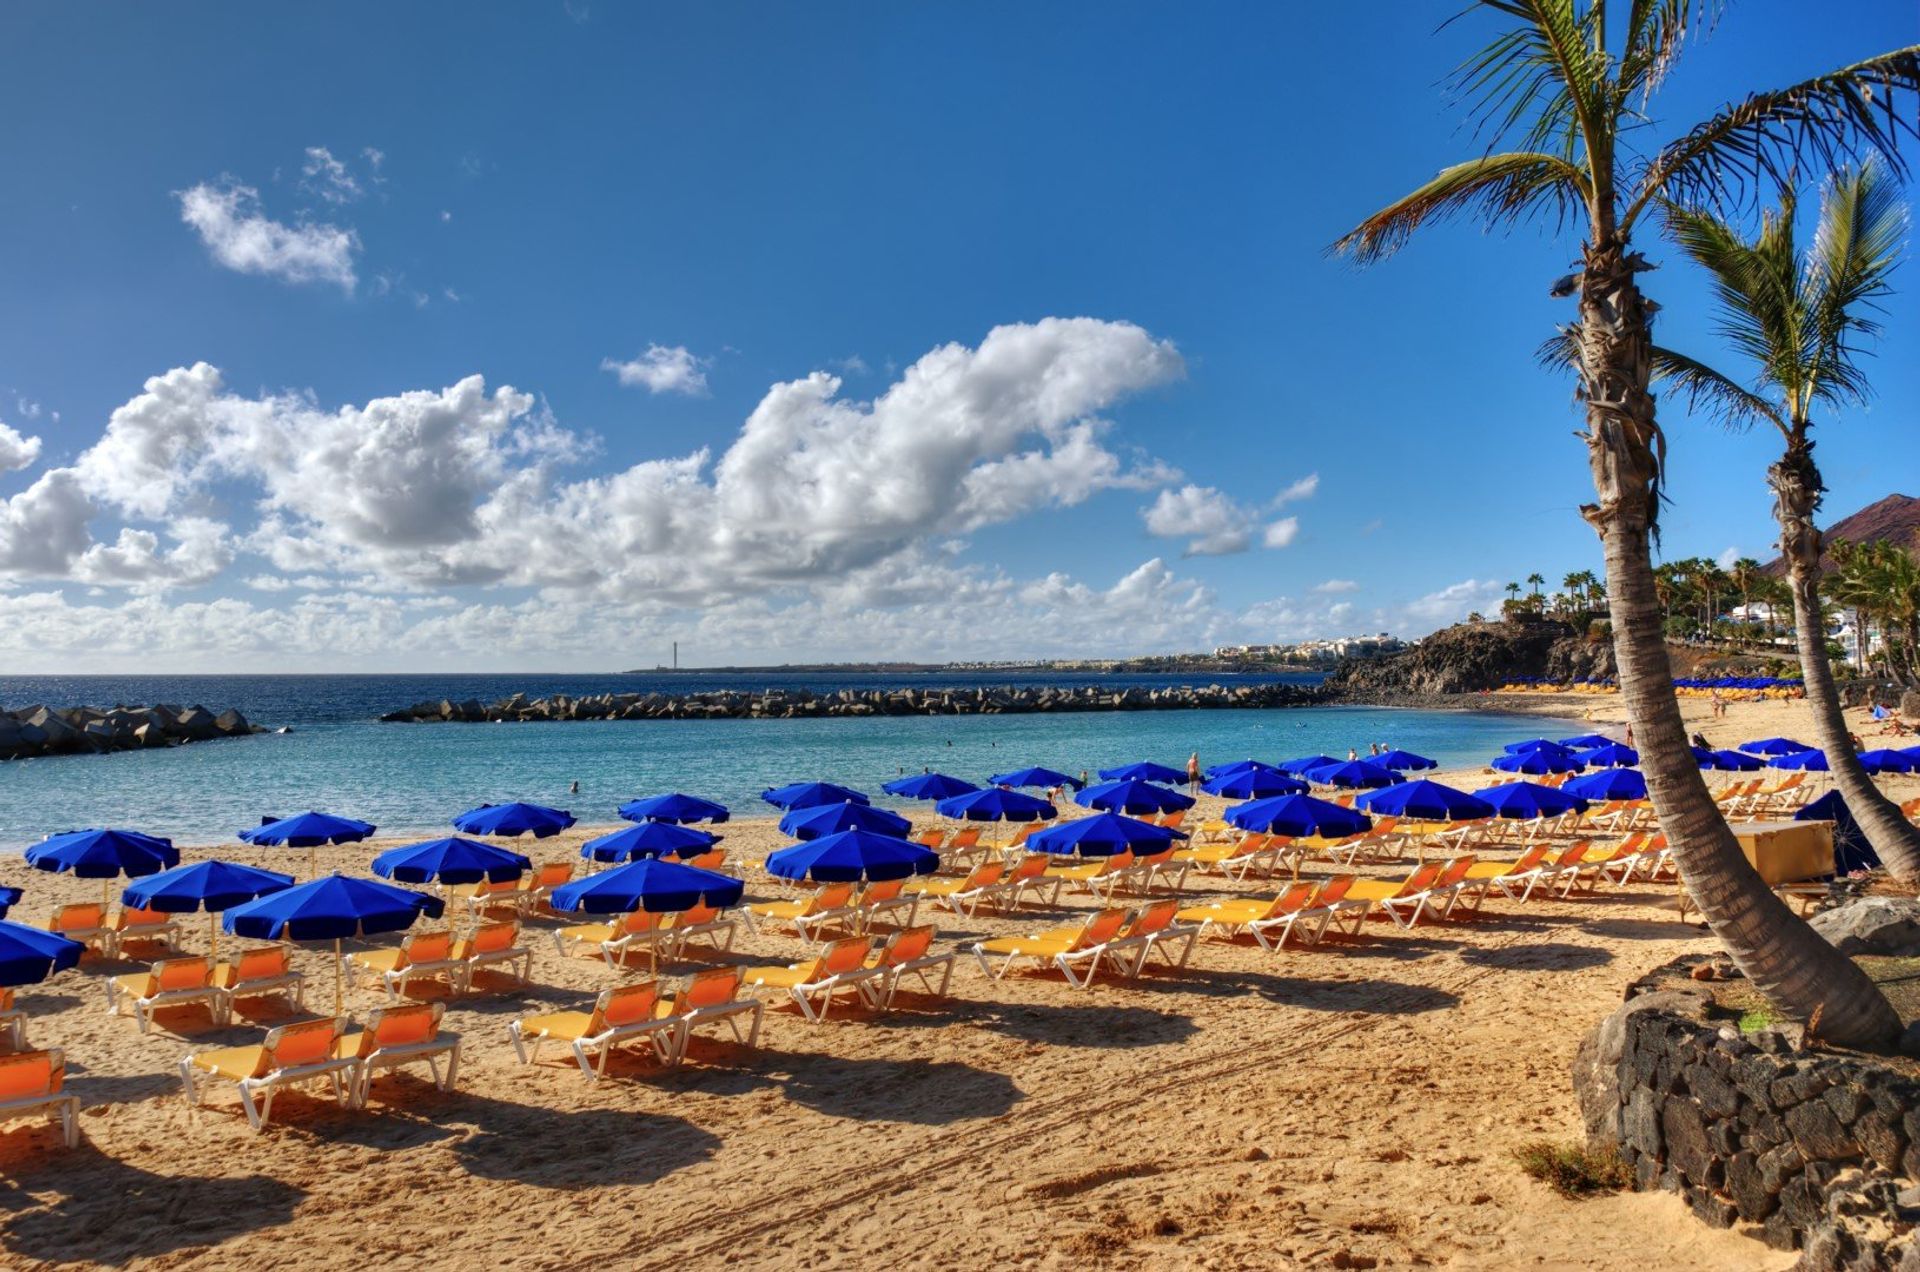 For a fun family day out by the coast, head to the local Blue Flag beach of Playa Blanca